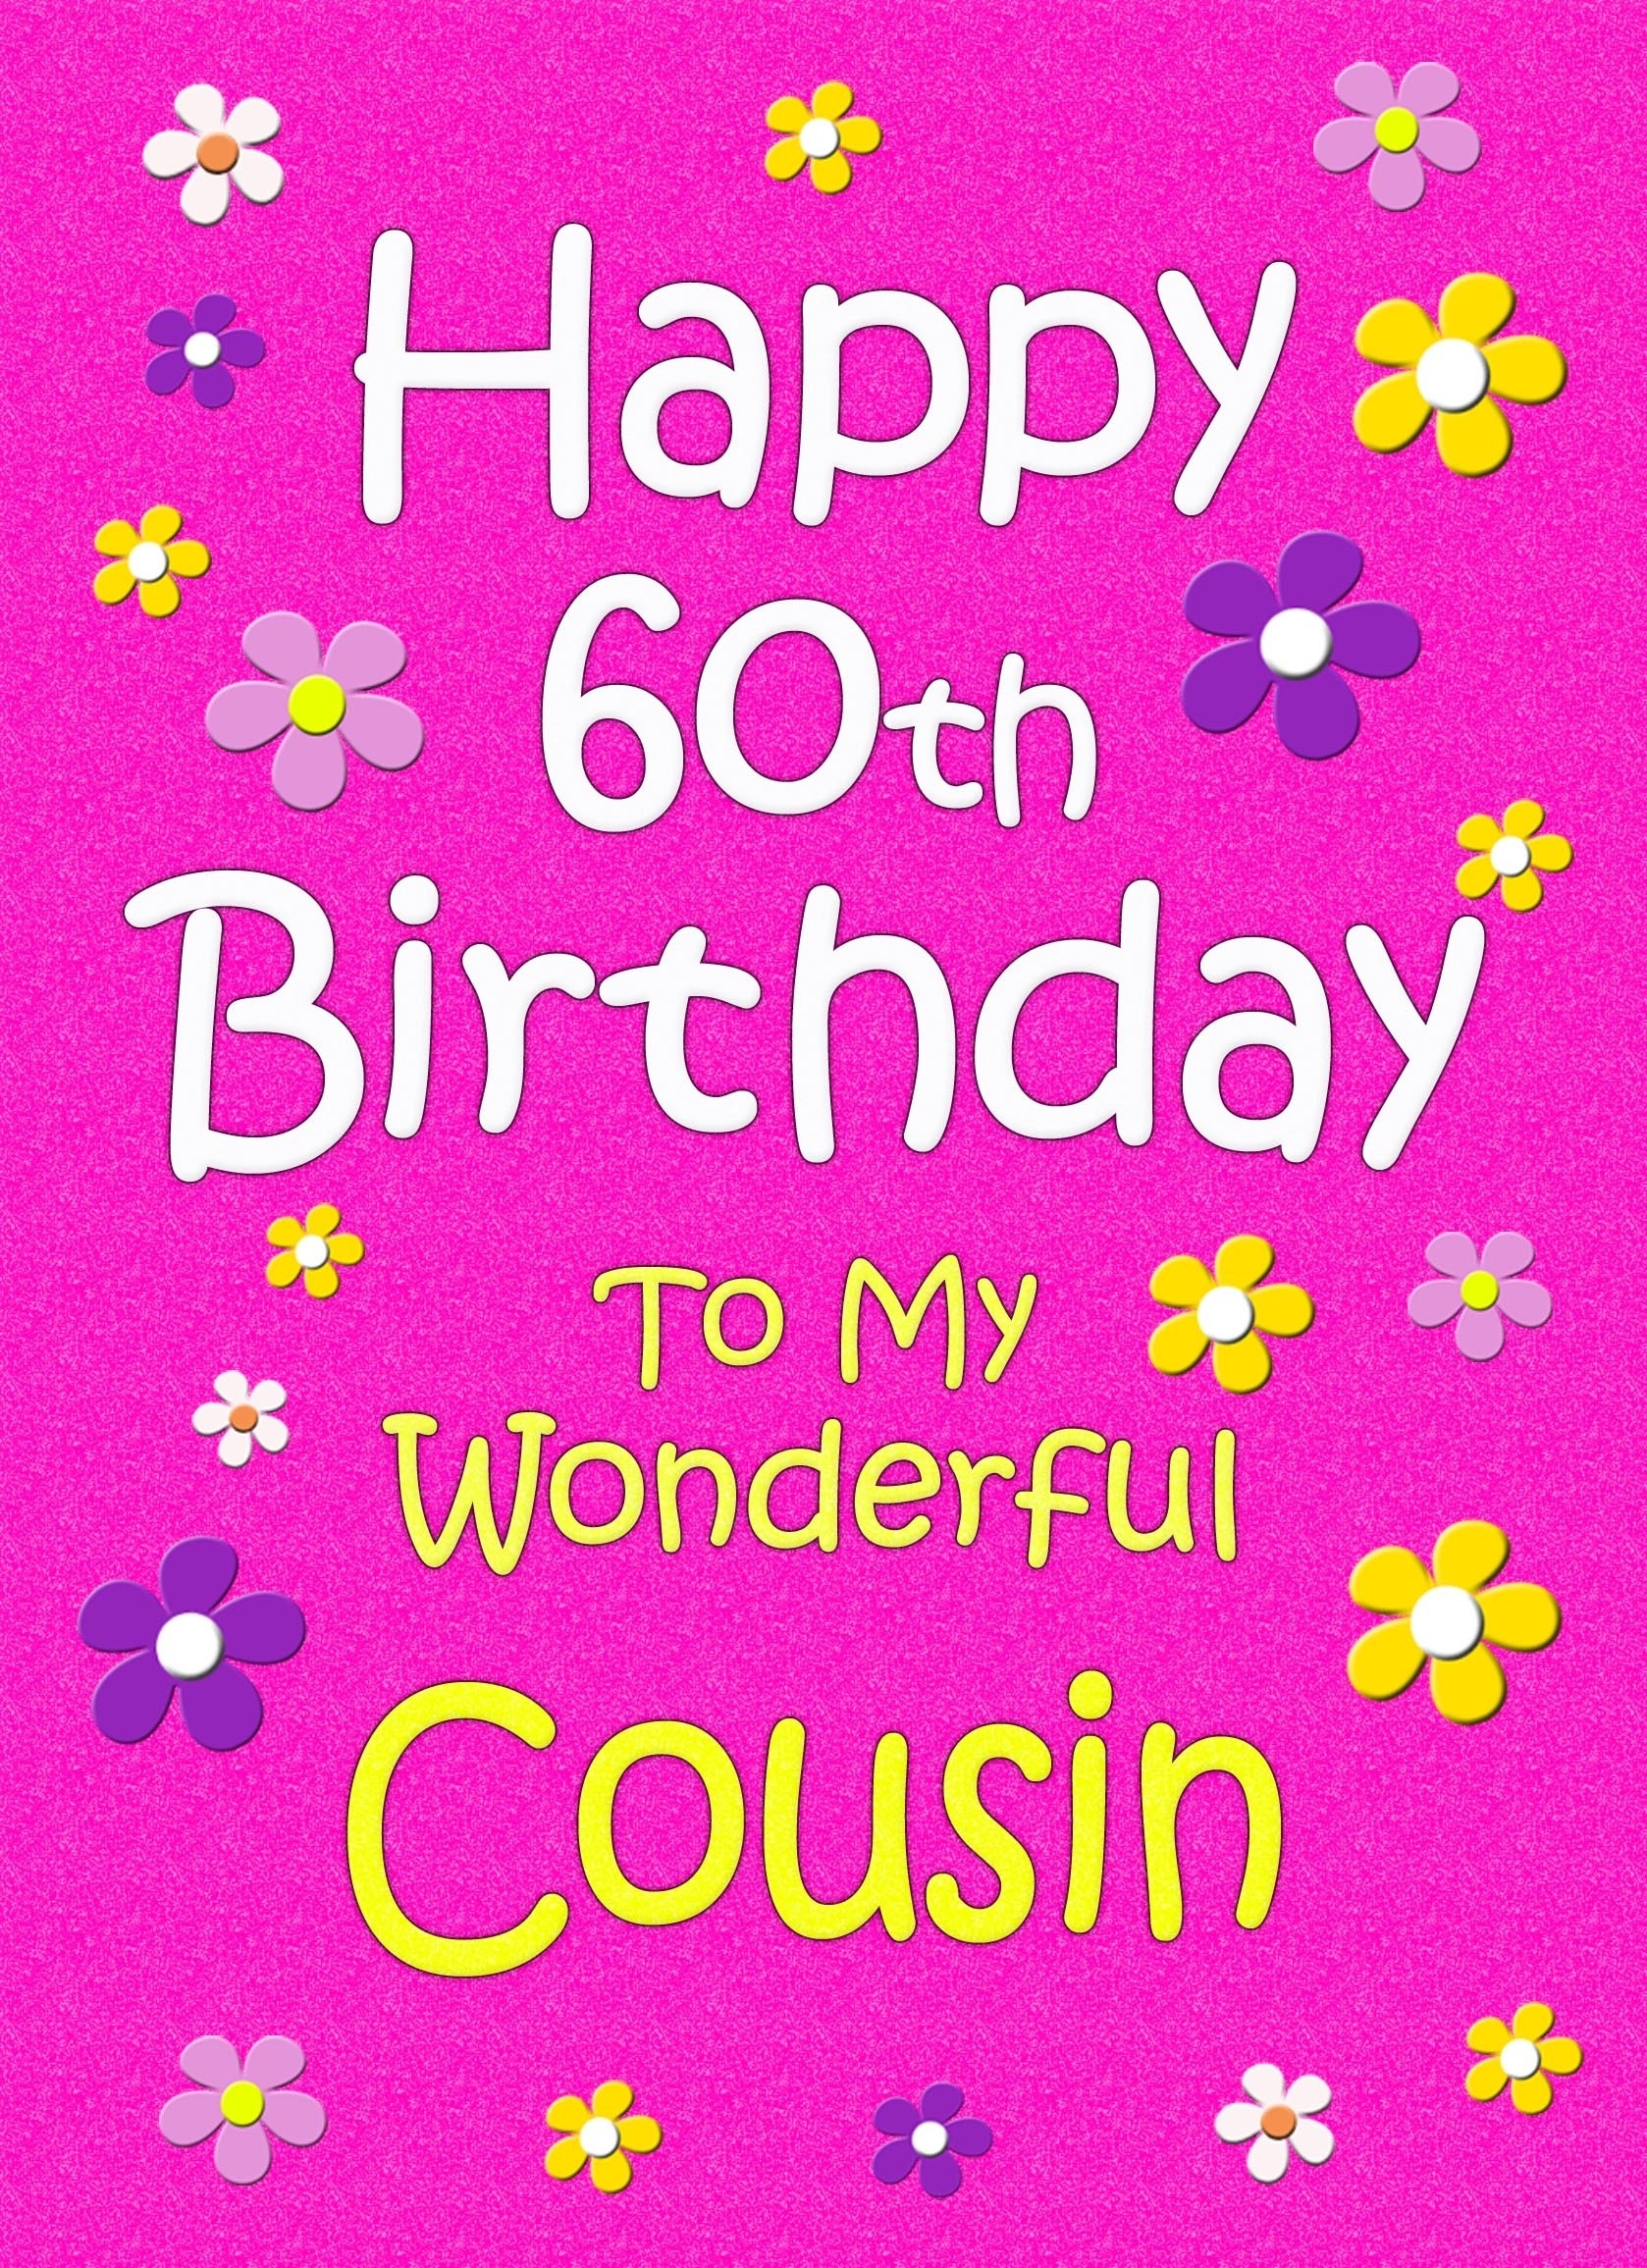 Cousin 60th Birthday Card (Pink)